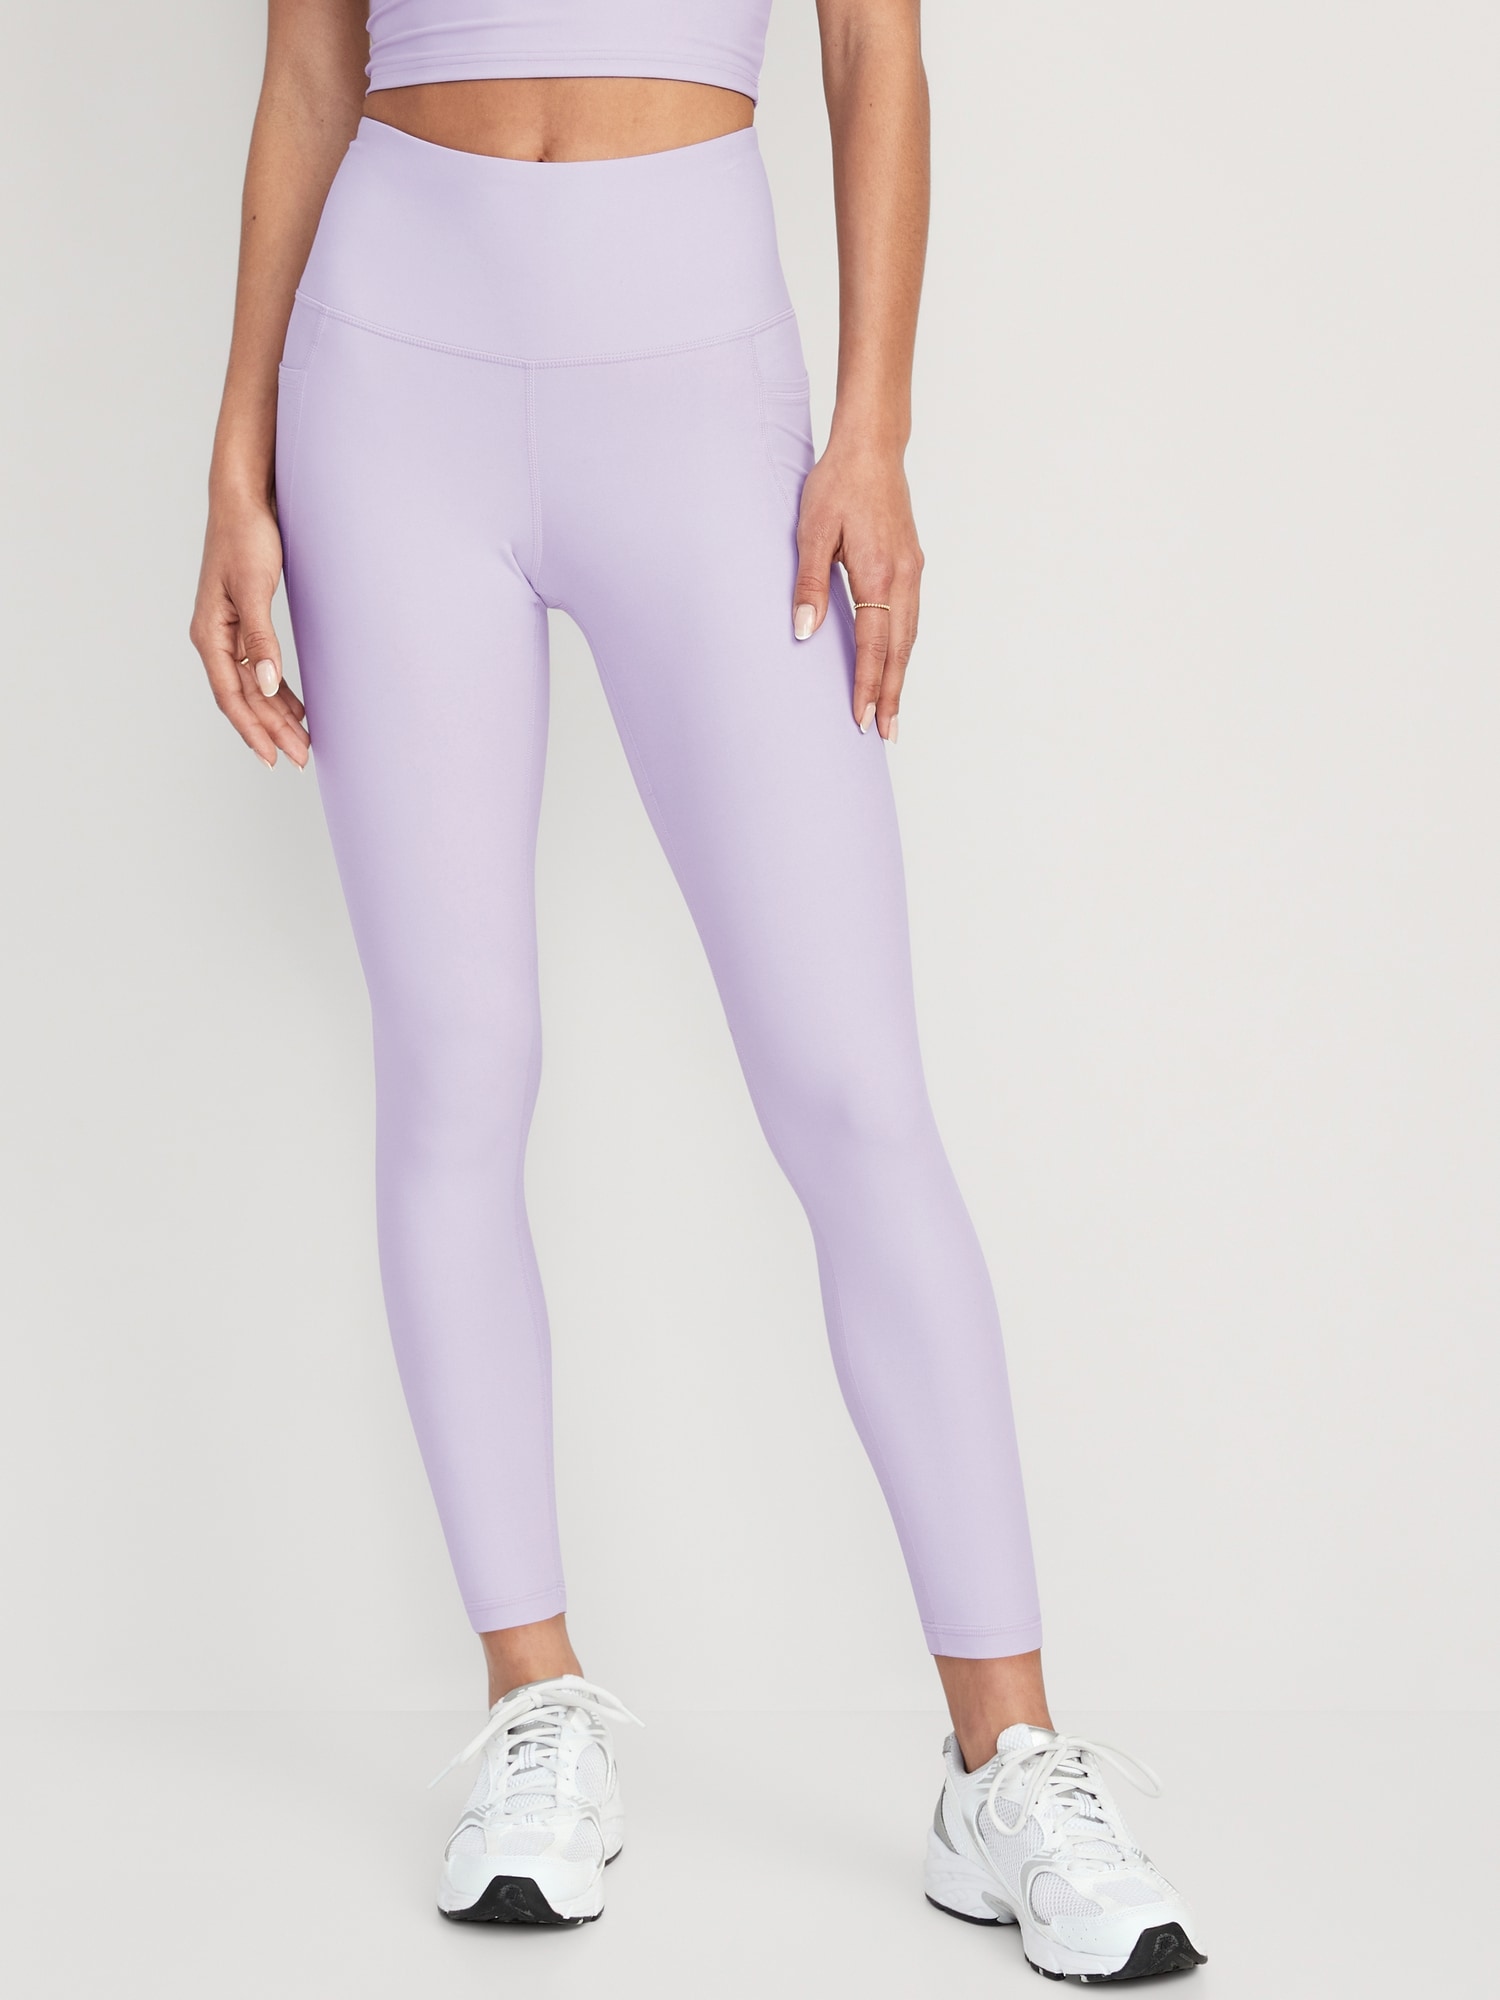 Old Navy High-Waisted PowerSoft Leggings